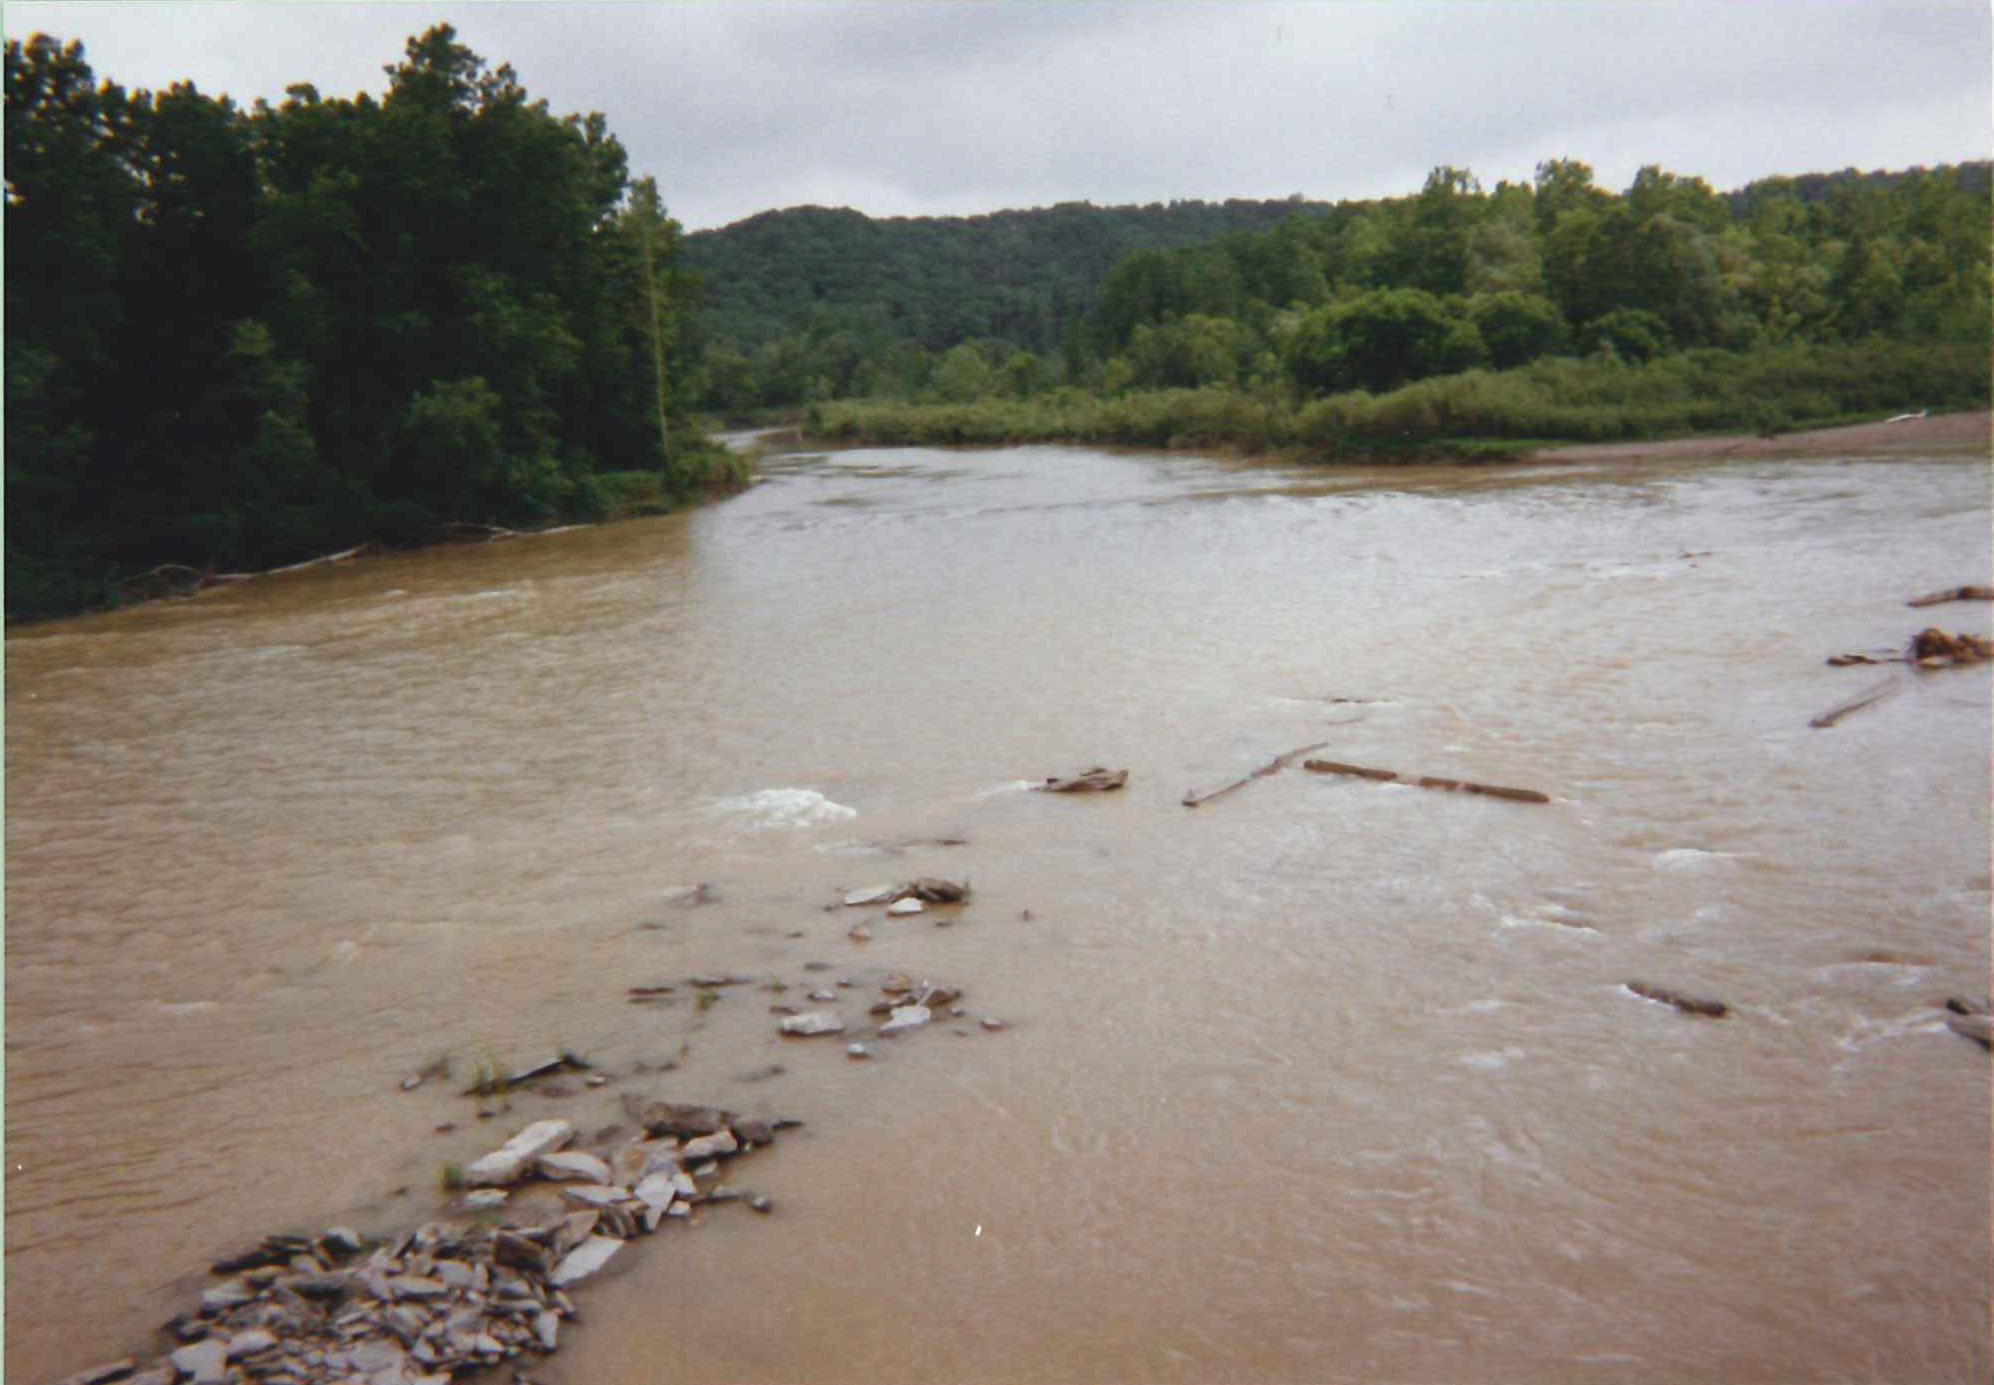 Photograph of the Genesee River at Portageville, NY (PRTN6) looking downstream